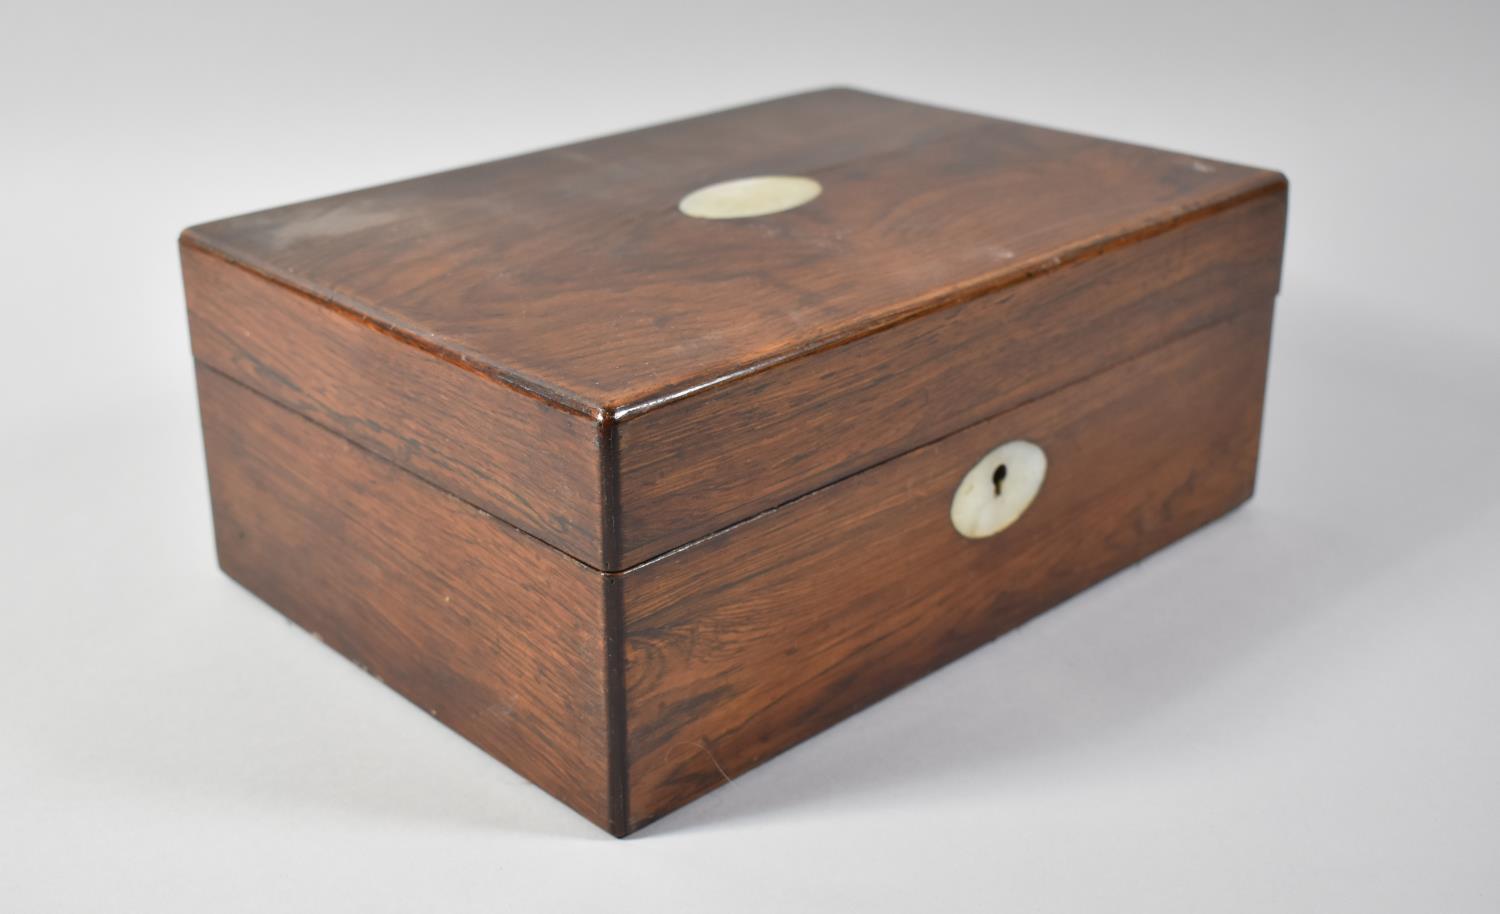 A Late 19th Century Rosewood Work Box with Oval Mother of Pearl Escutcheons, Missing Inner Tray